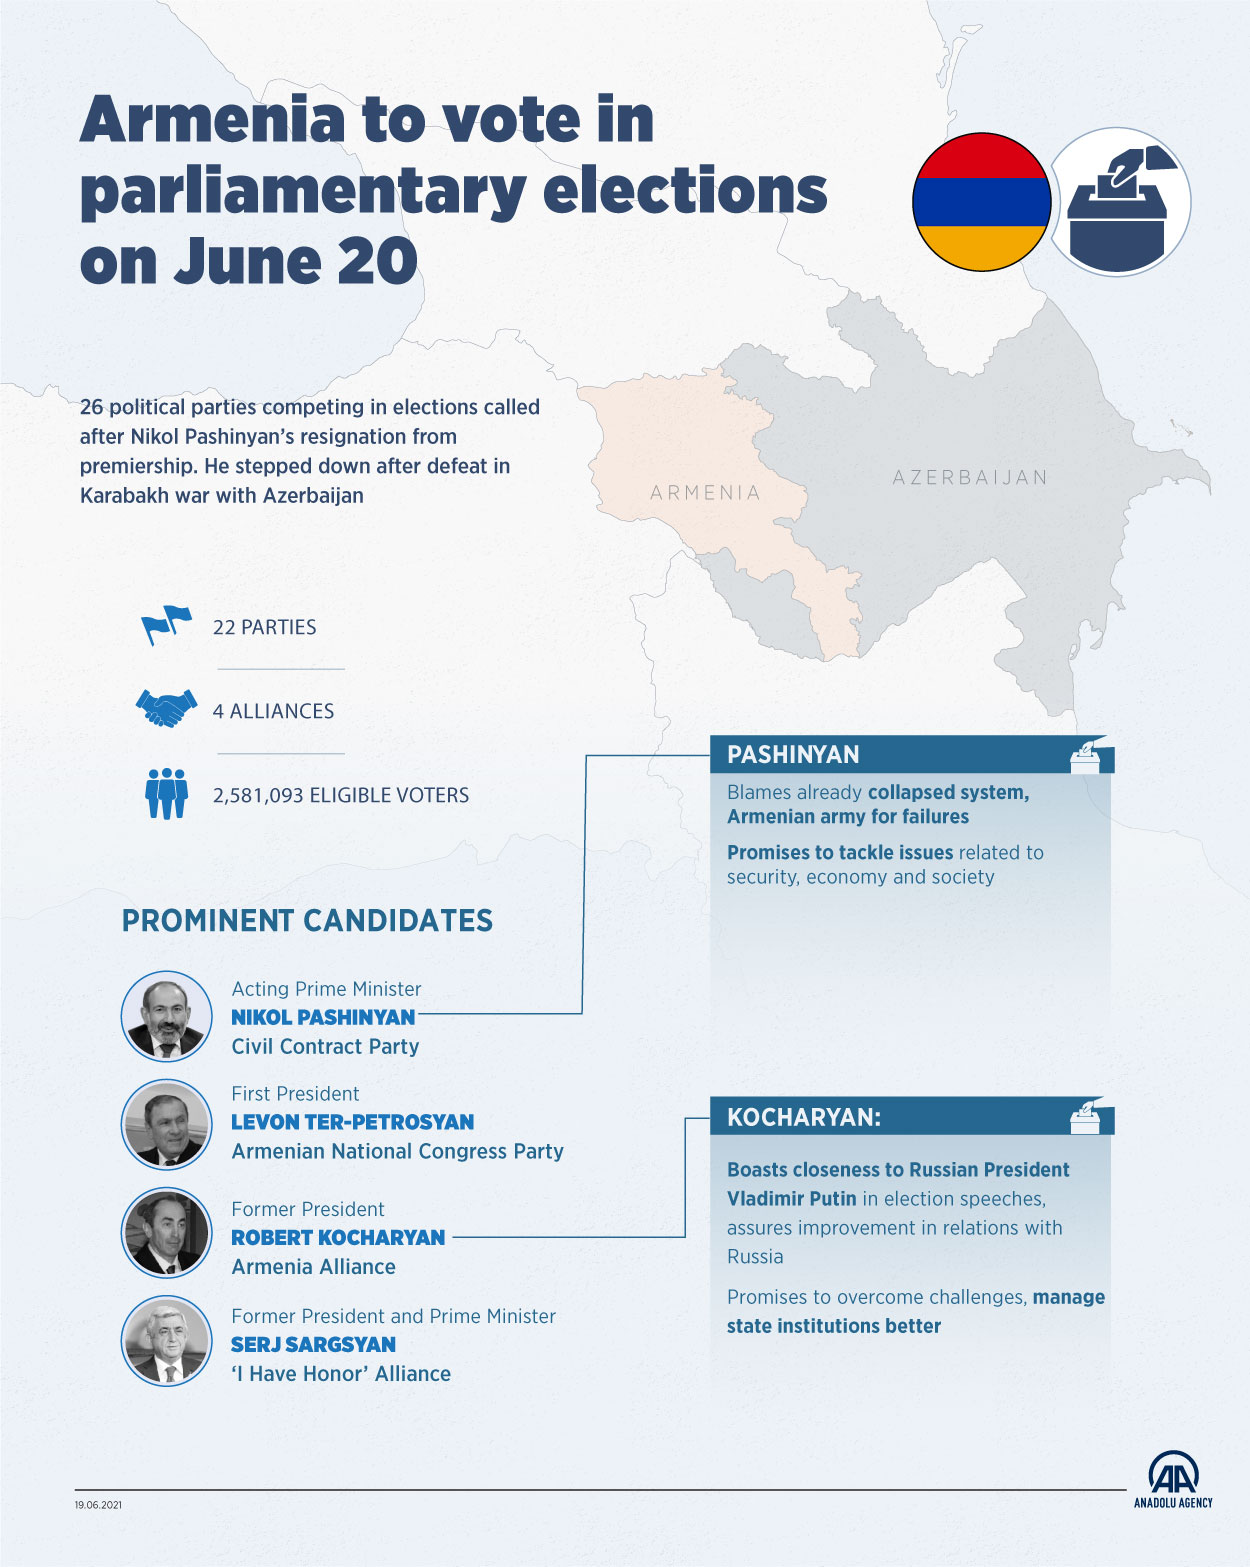 Armenia to vote in parliamentary elections on June 20